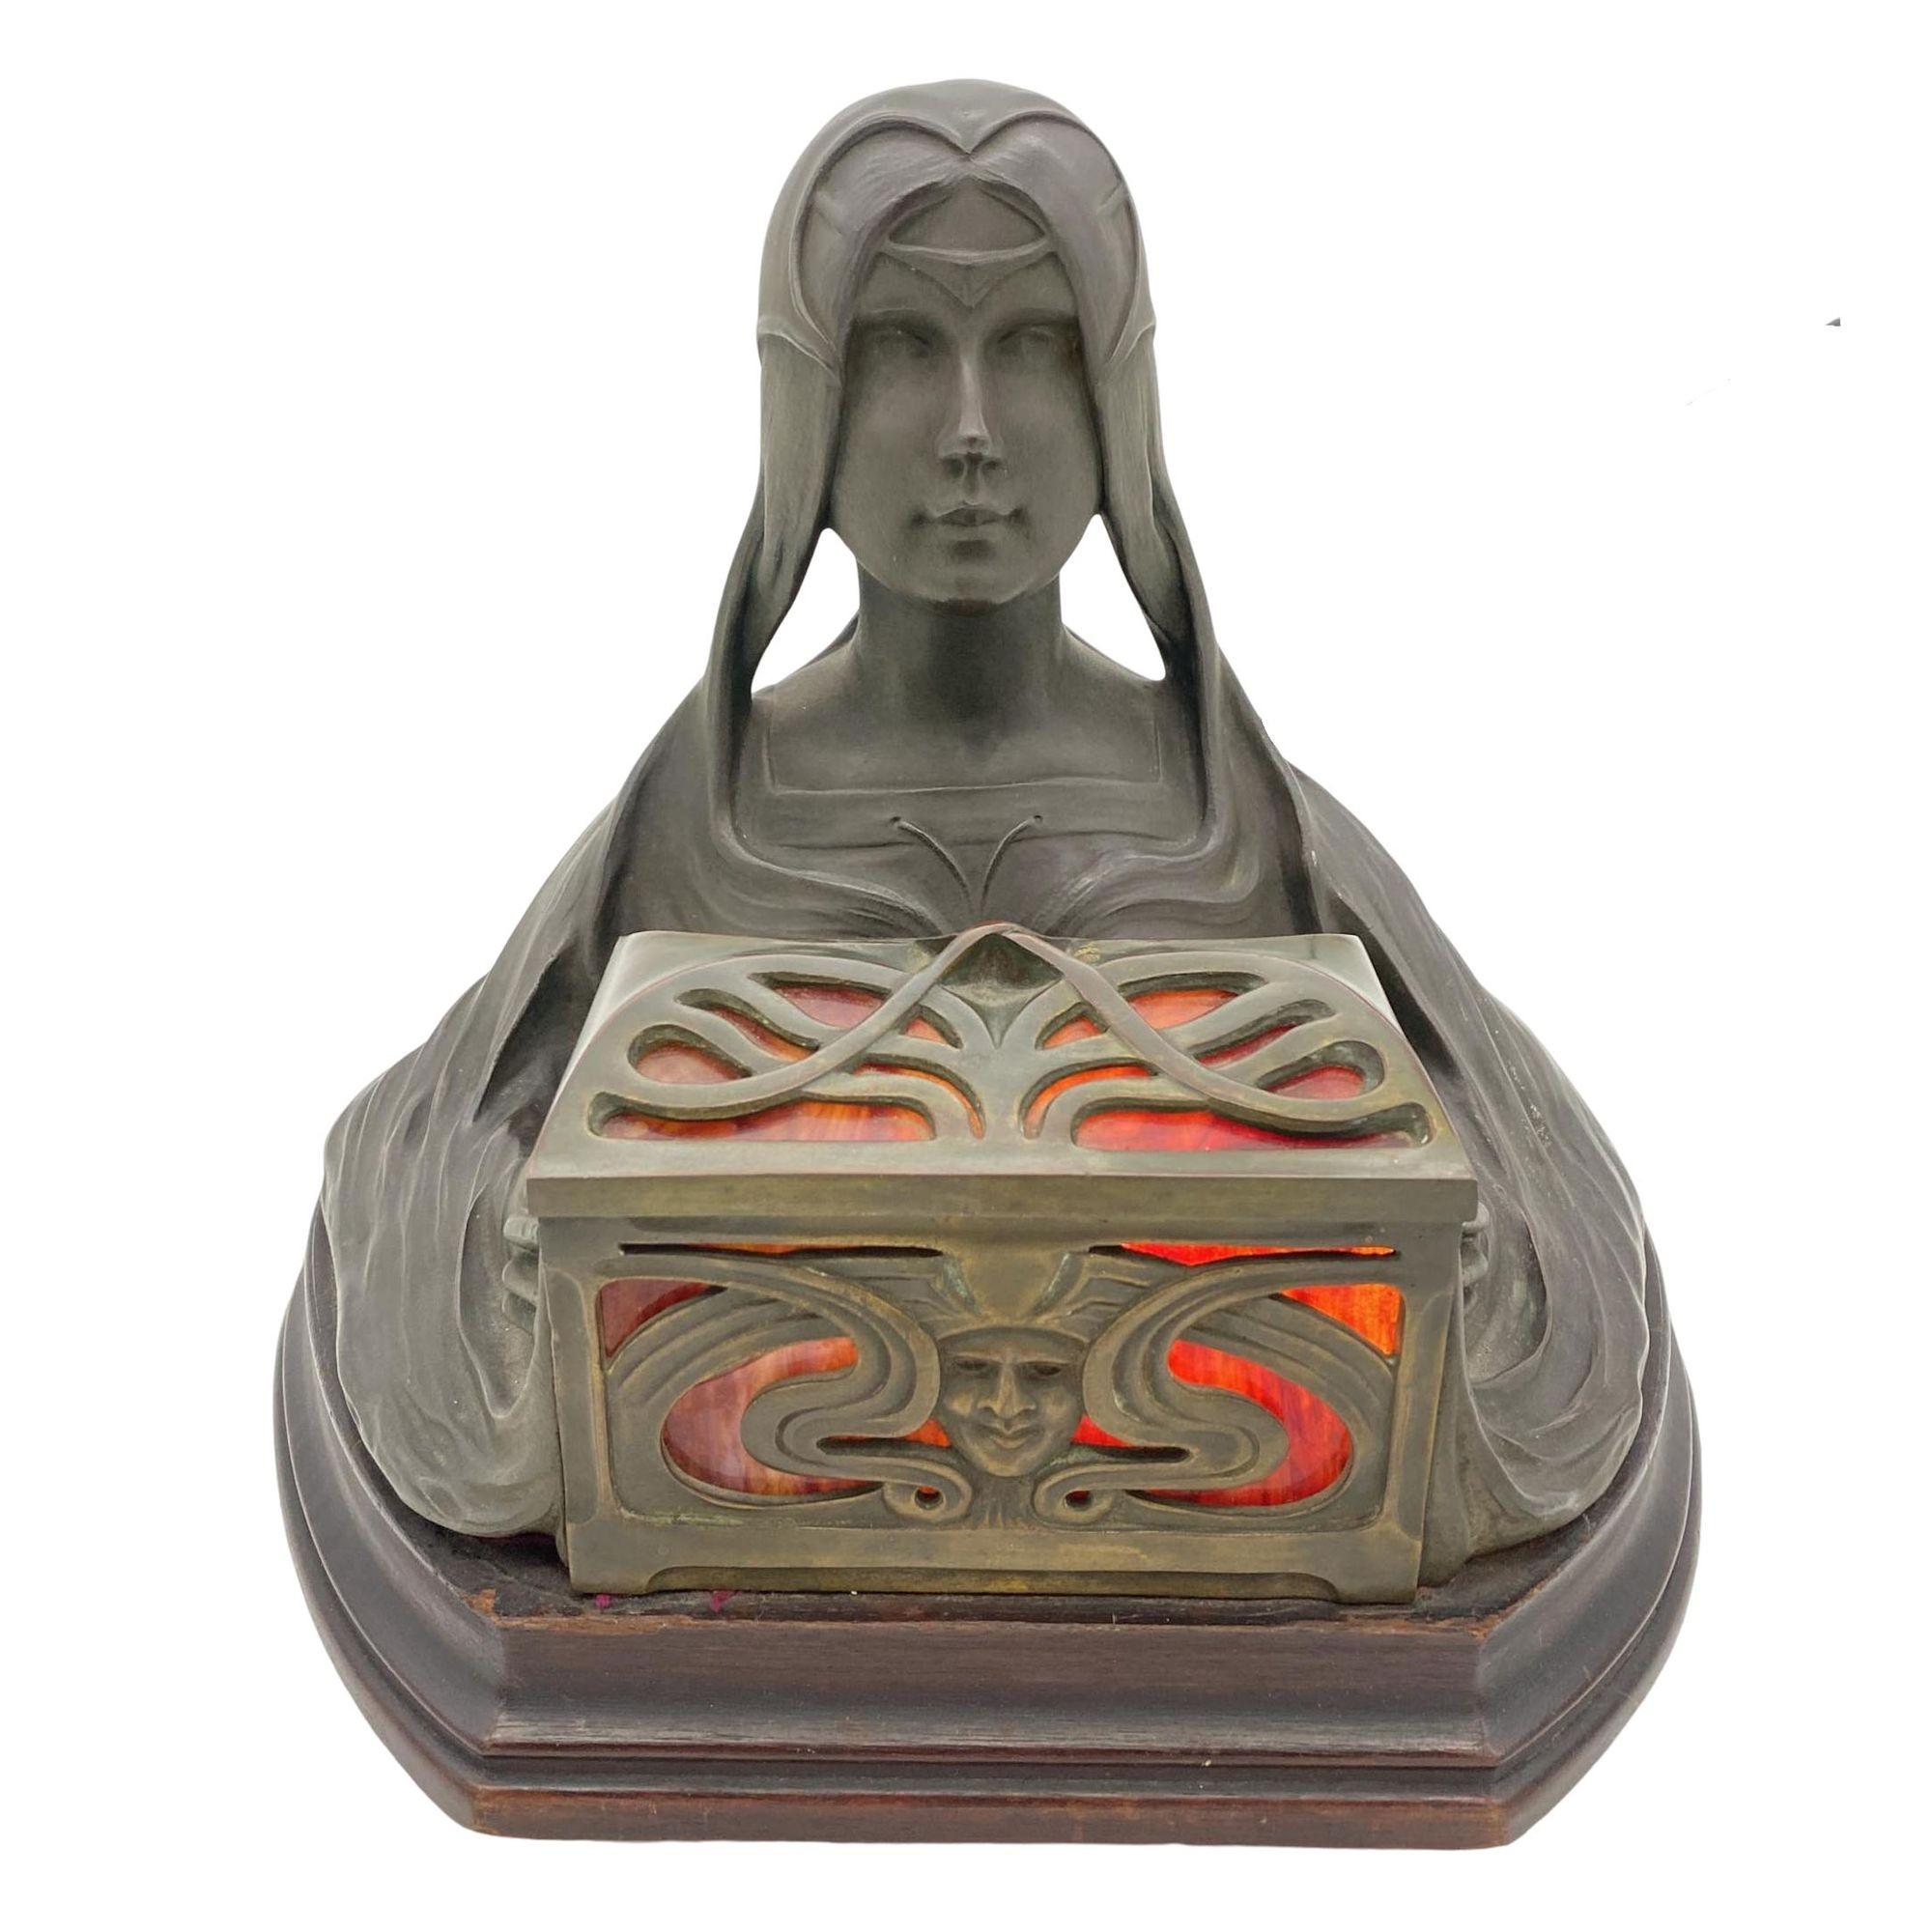 Art Nouveau sculpture by in gilded bronze representing a young girl holding an illuminating casket with panes of marbled red glass resting on a mahogany base.

Great example of Art Nouveau sculpting and casting at its finest , time has given the